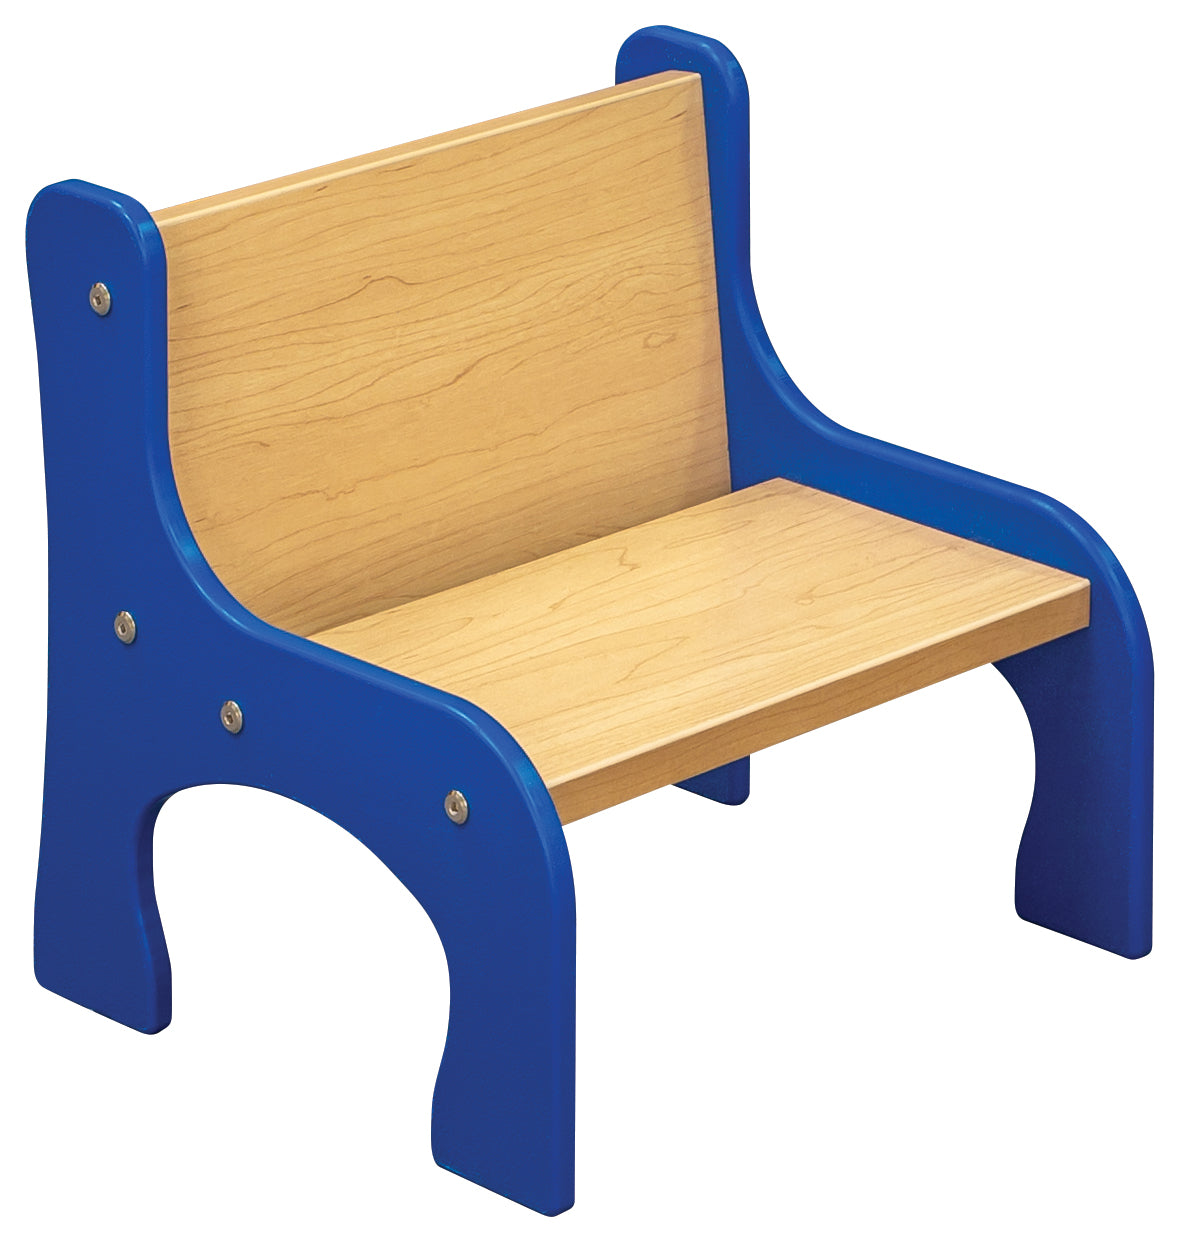 6" Activity Chair - Set of 2 Royal Blue